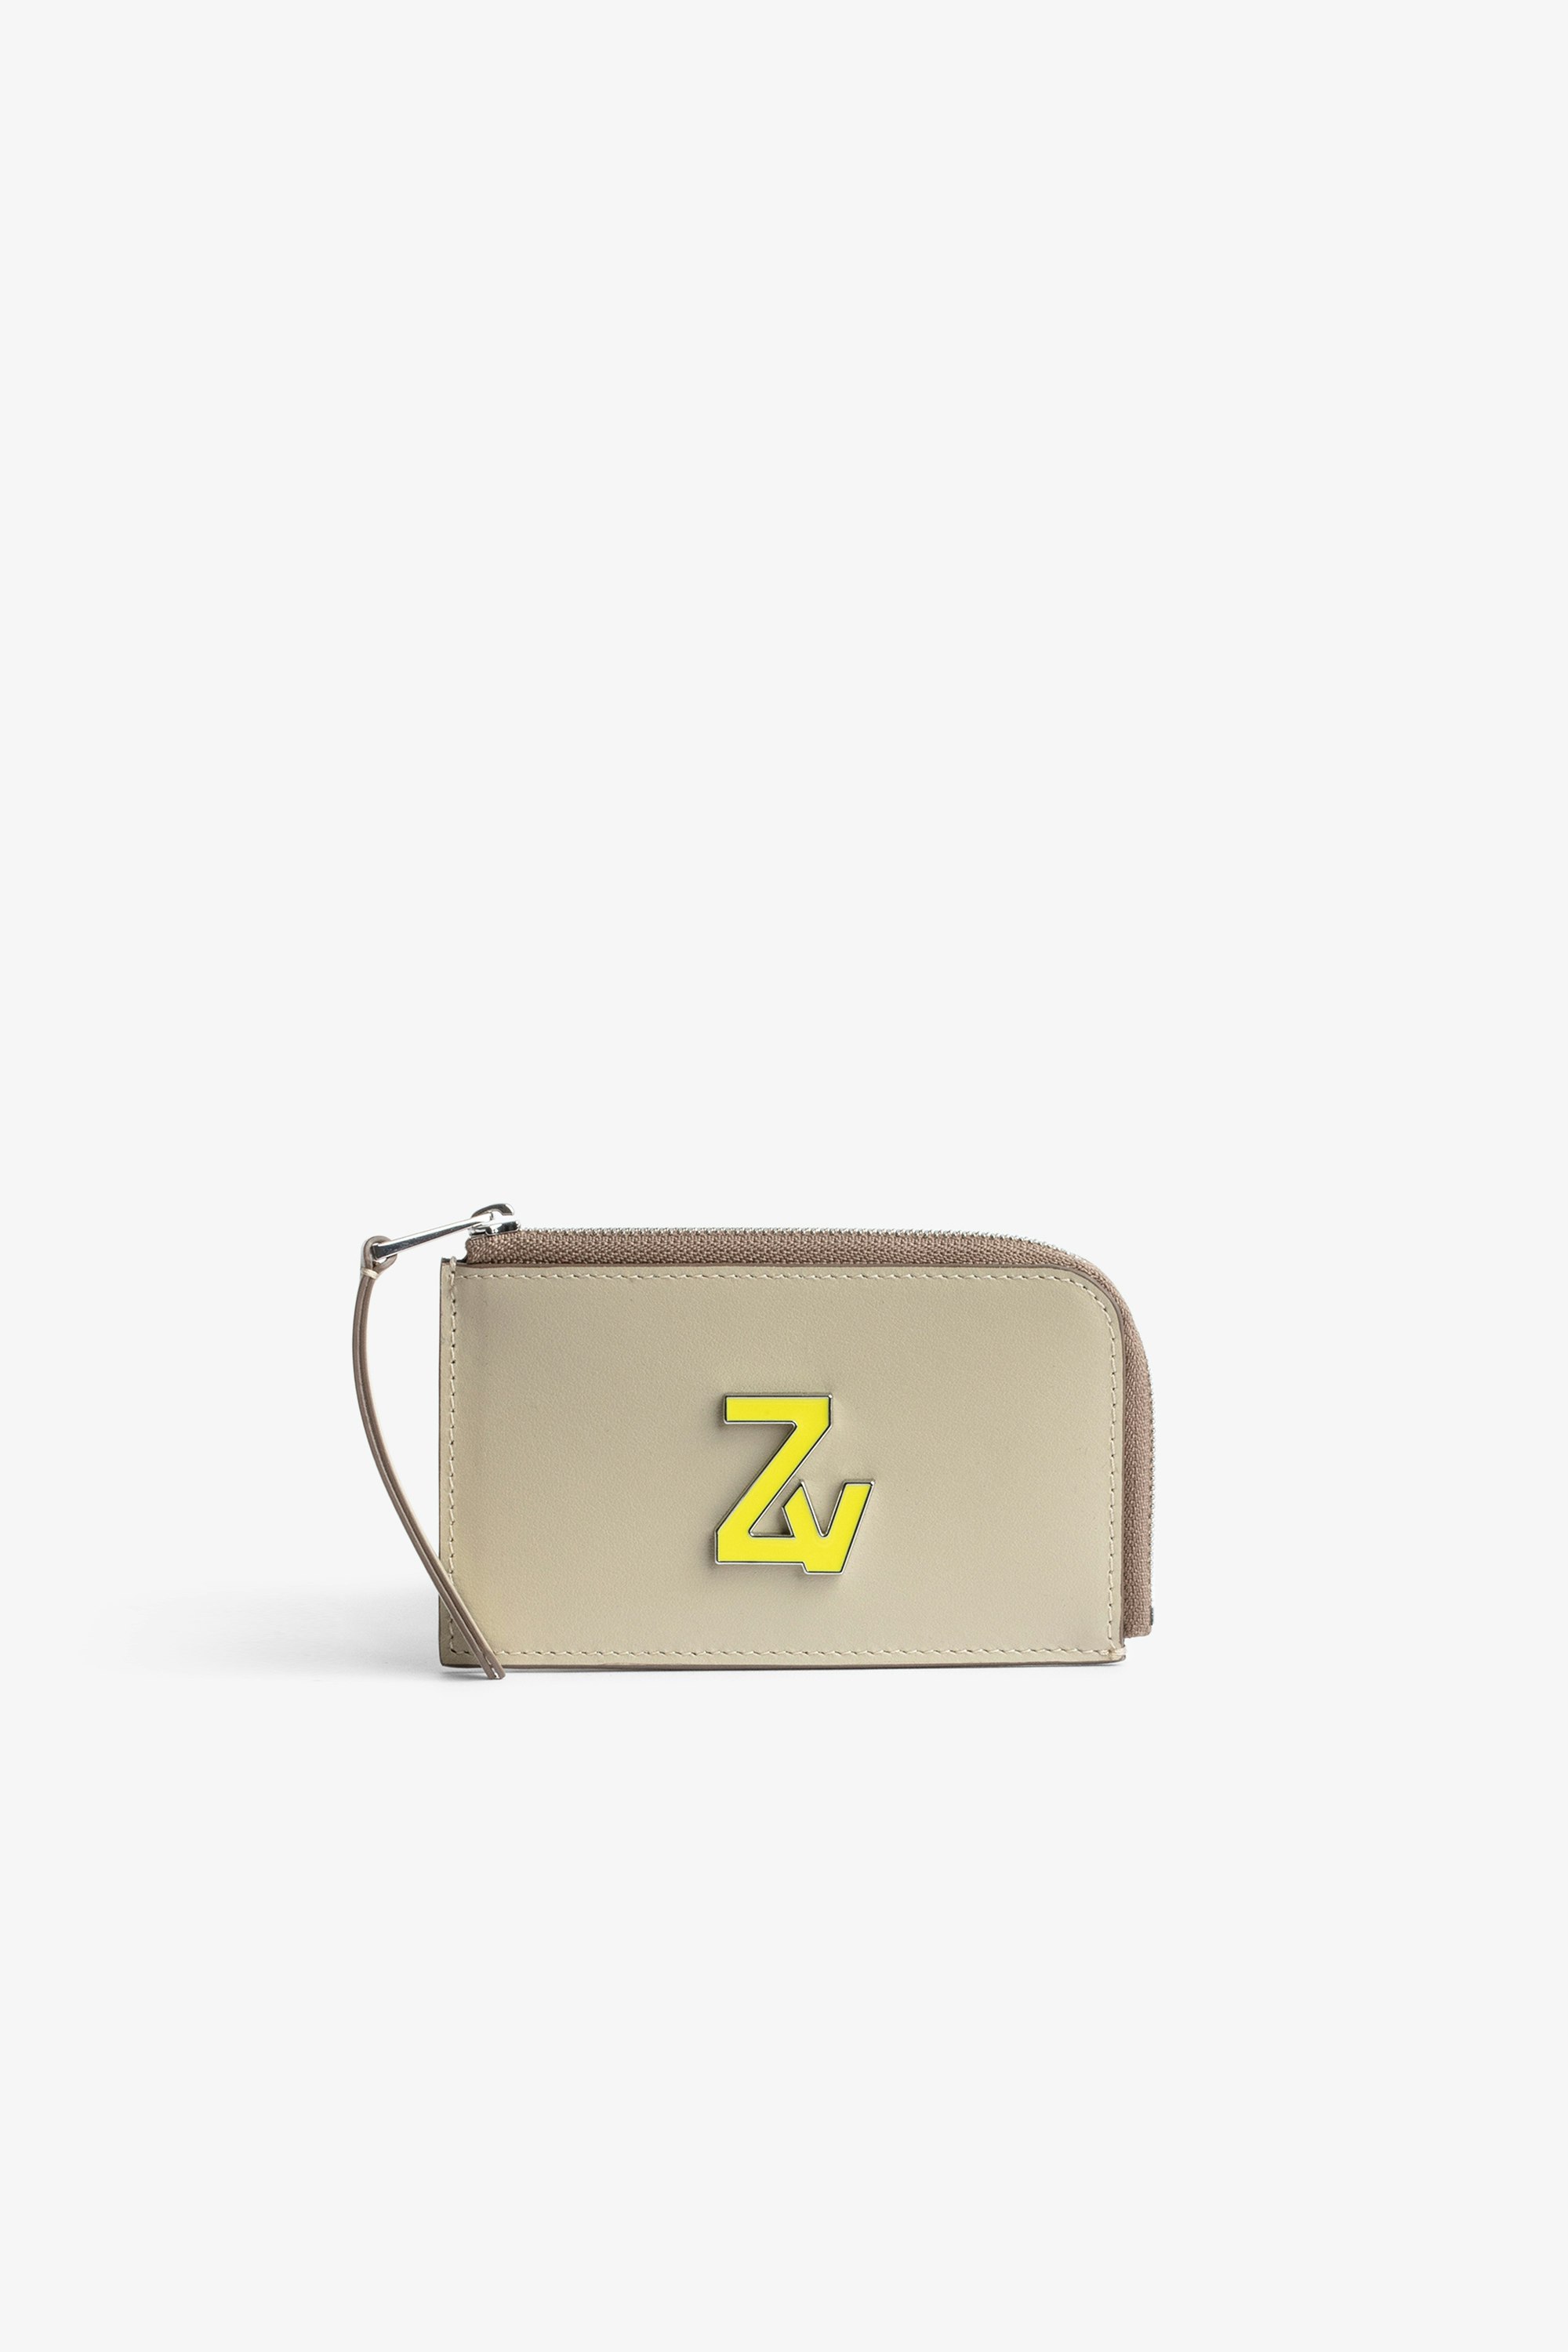 ZV Initiale Le Medium Monogram 財布 Women’s zipped card holder in beige smooth leather with yellow ZV